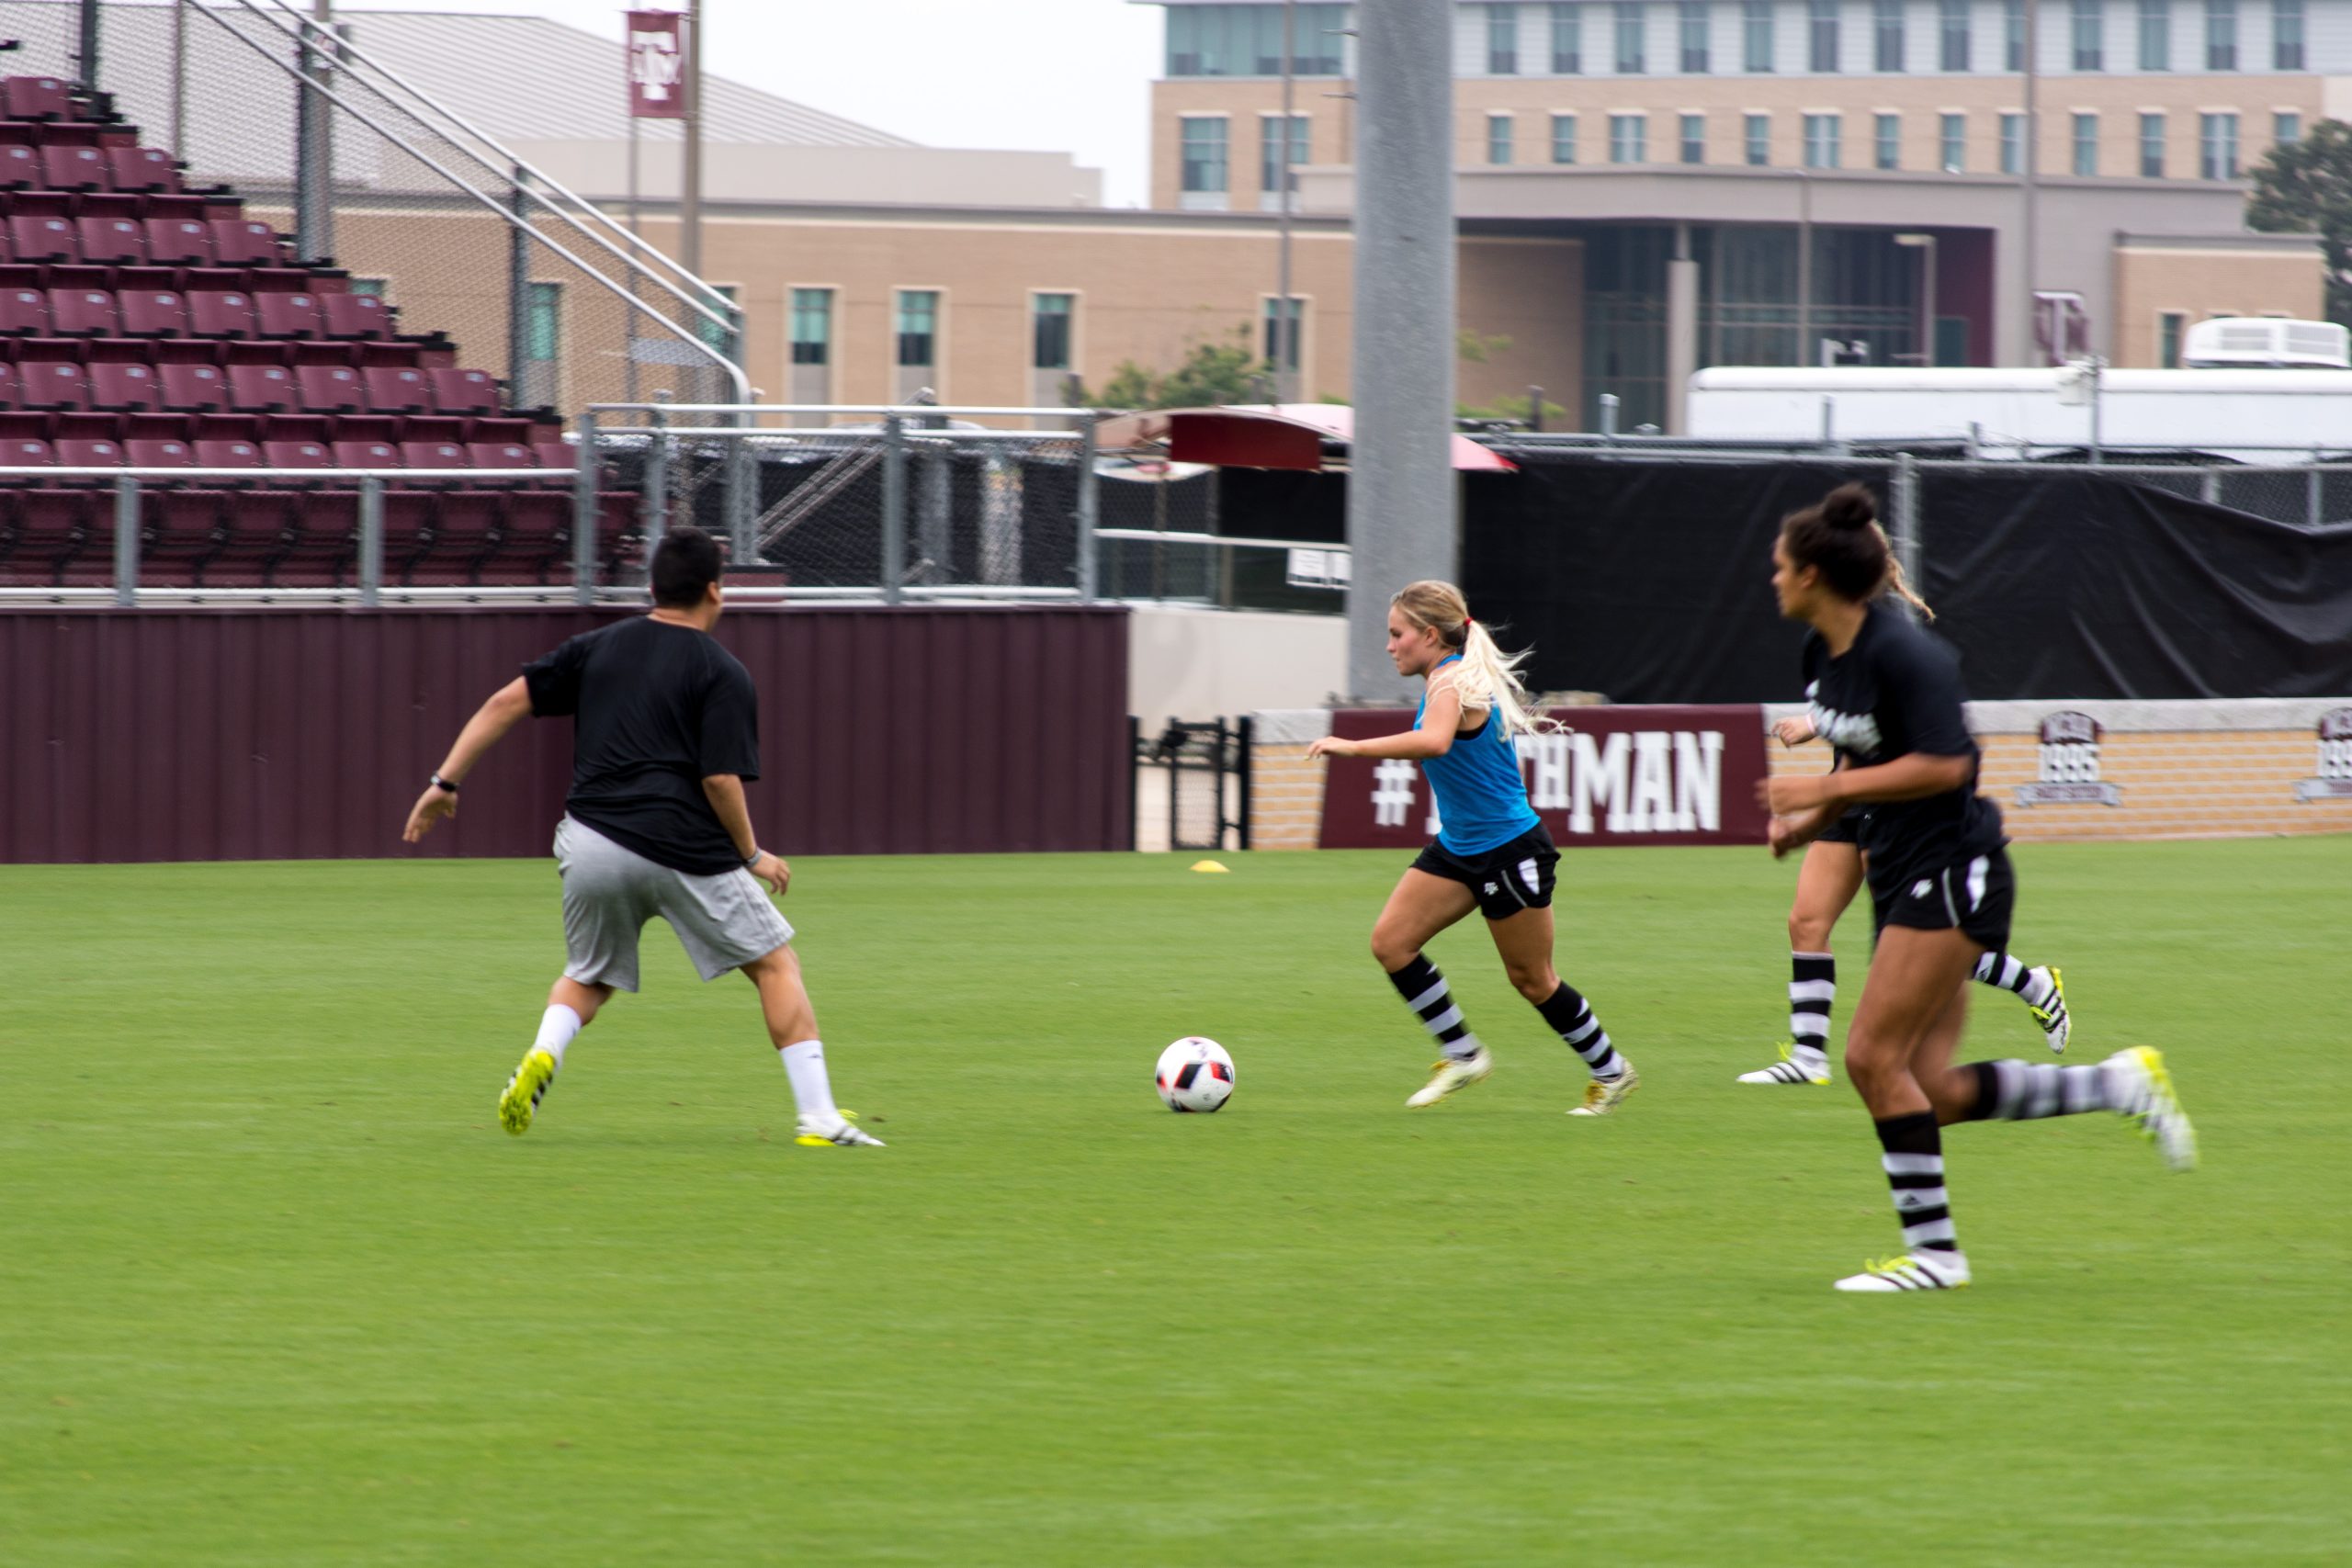 Aggies+Womens+Soccer+gears+up+for+first+game+of+the+season+against+Florida+State